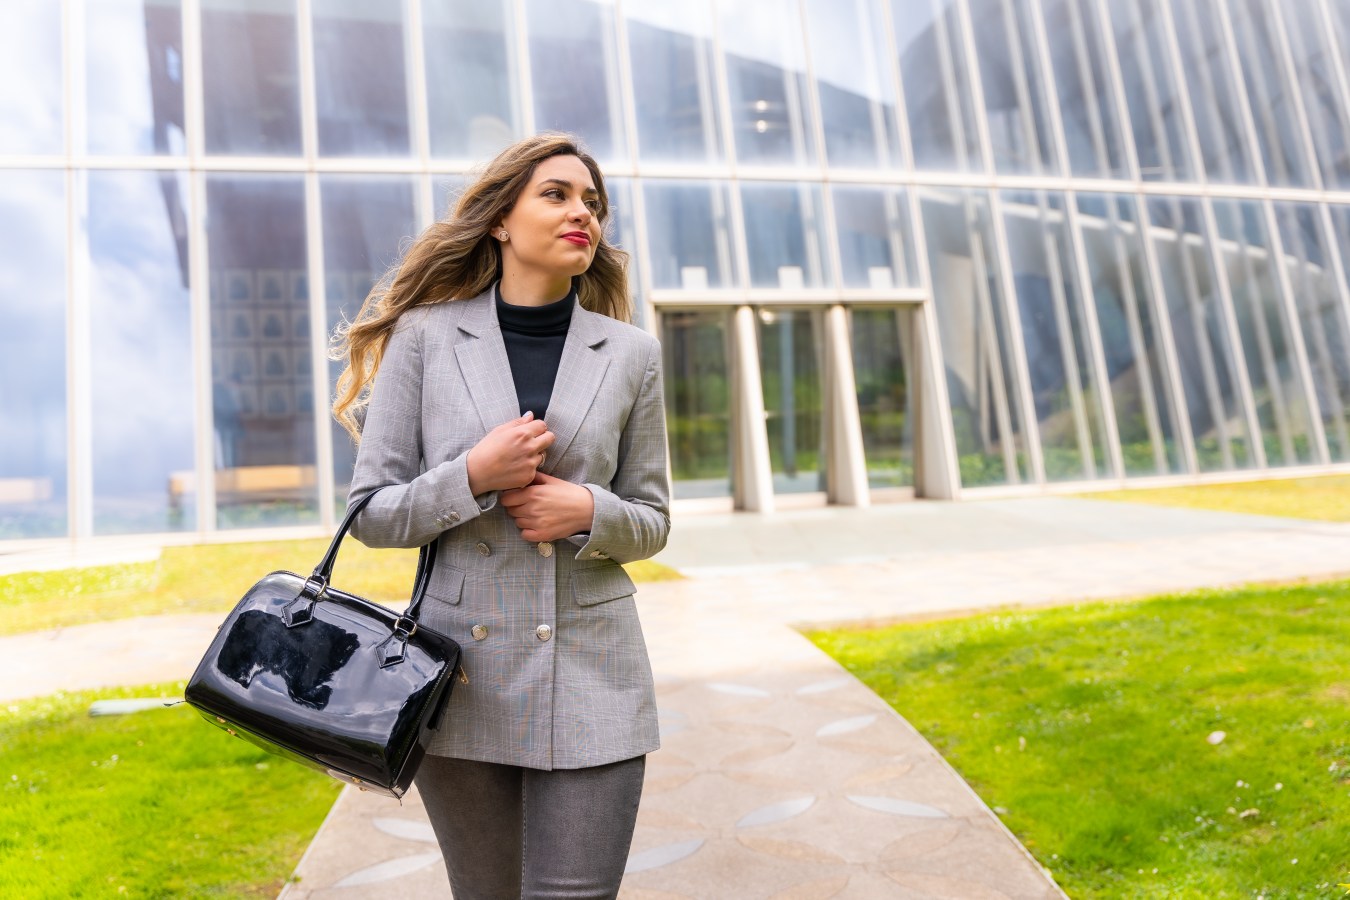 Portrait of a young businesswoman in a gray suit outside the office next to a glass building, leaving the office after finishing the working day